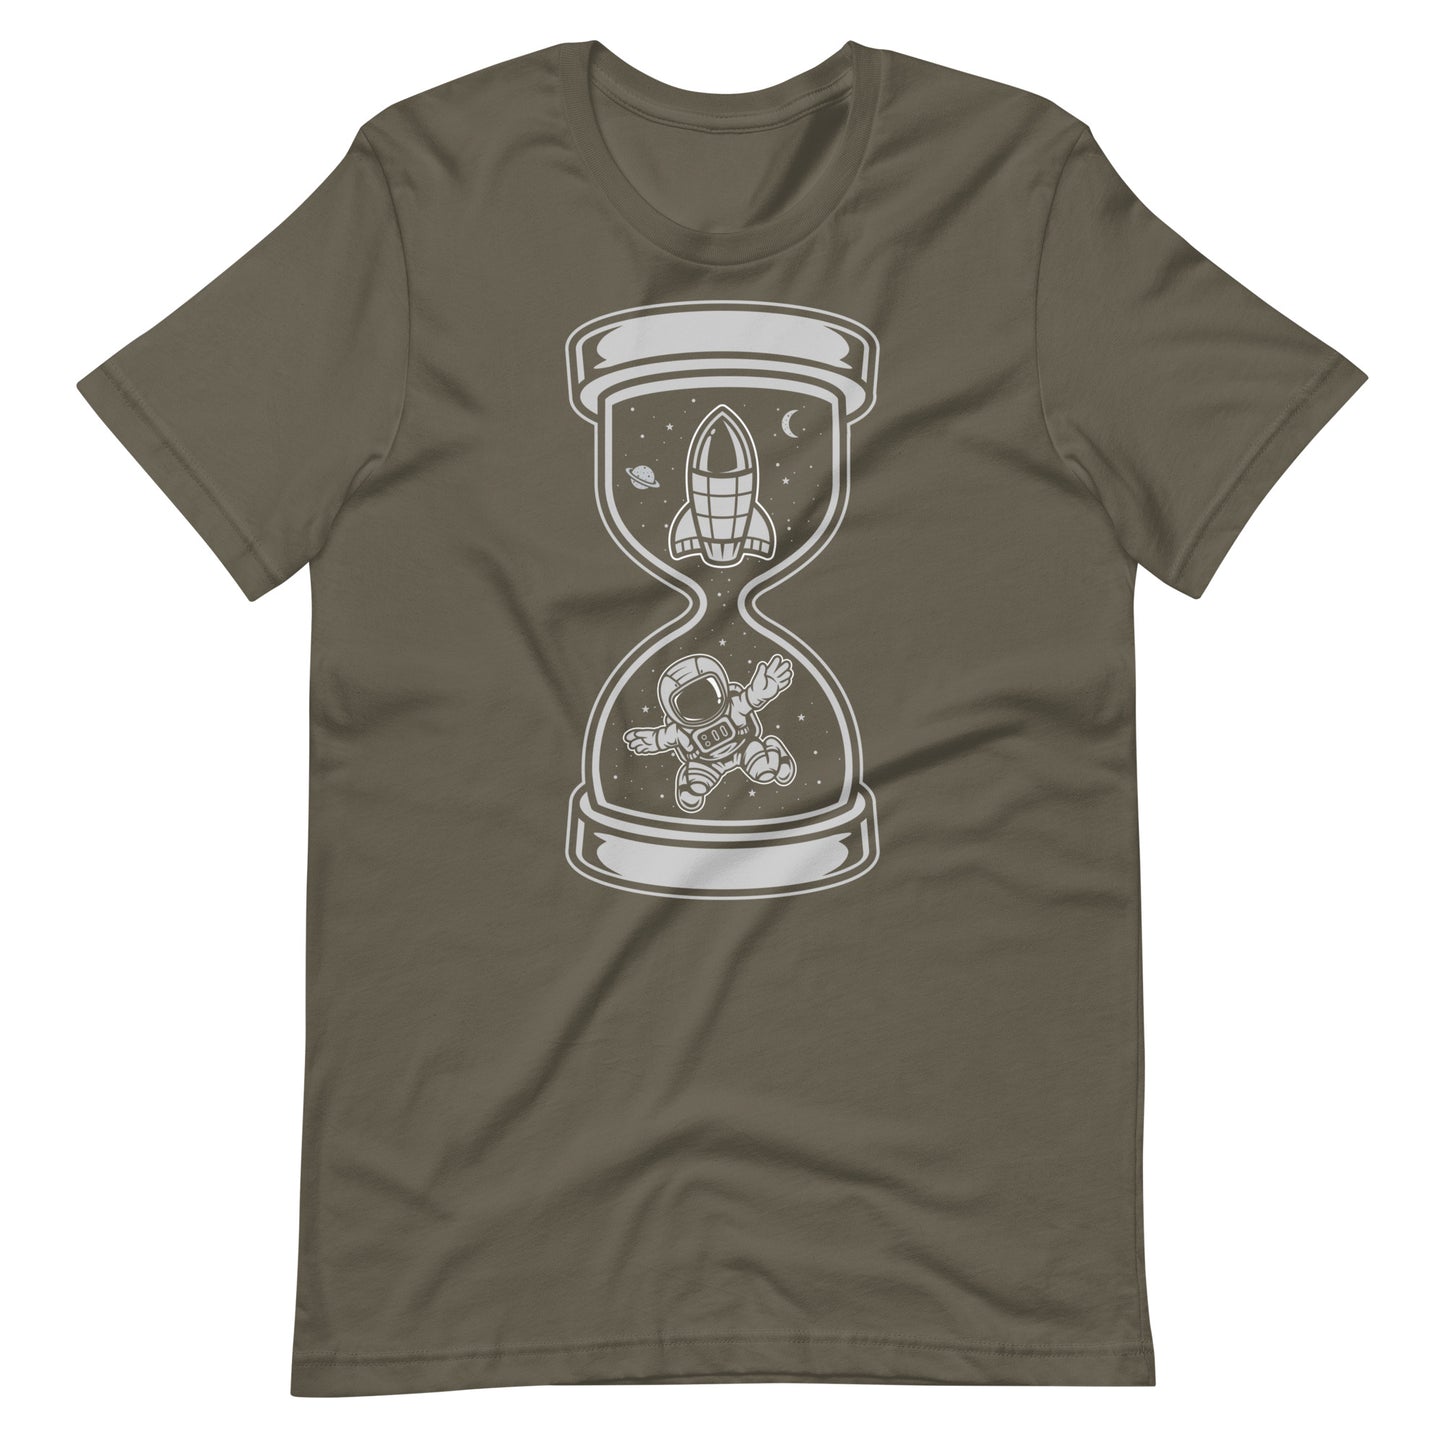 Astronaut Time - Men's t-shirt - Army Front